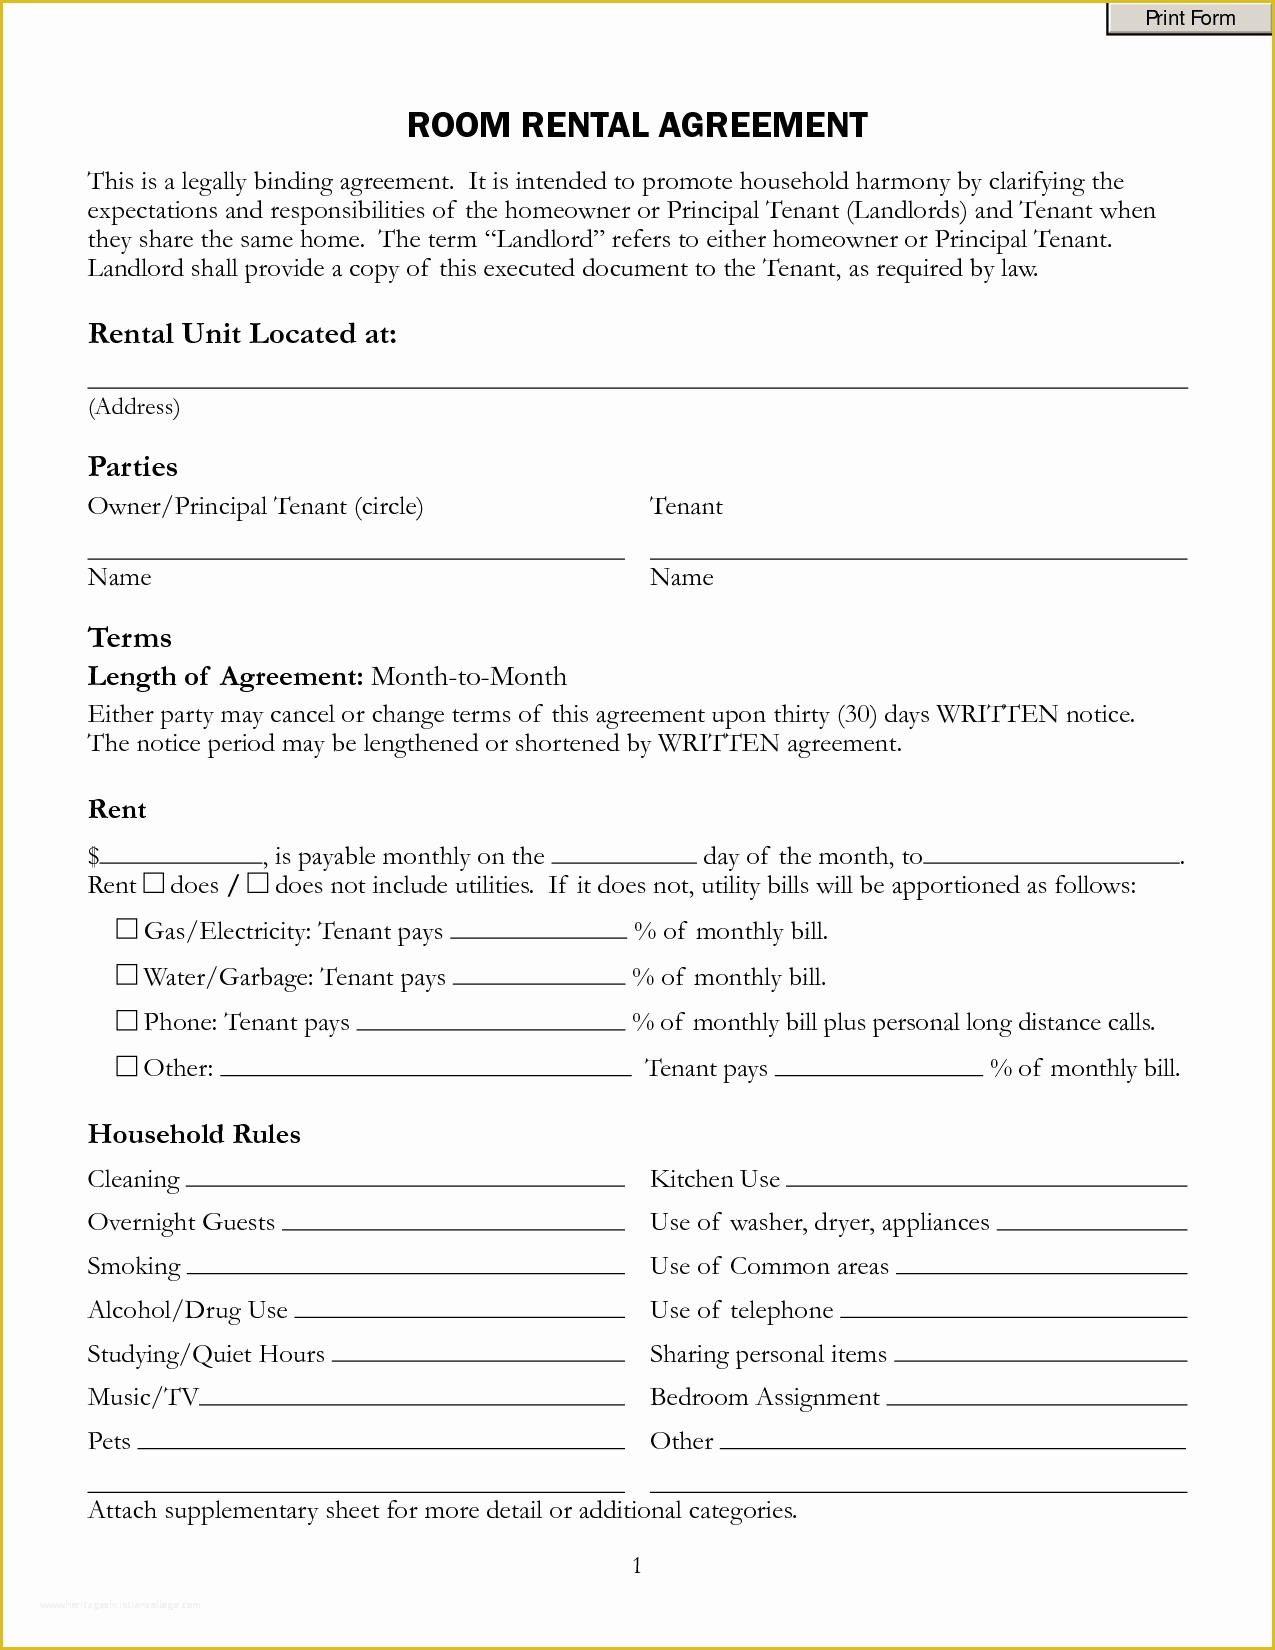 Renting Contract Template Free Of top 5 Resources to Get Free Rental Agreement Templates